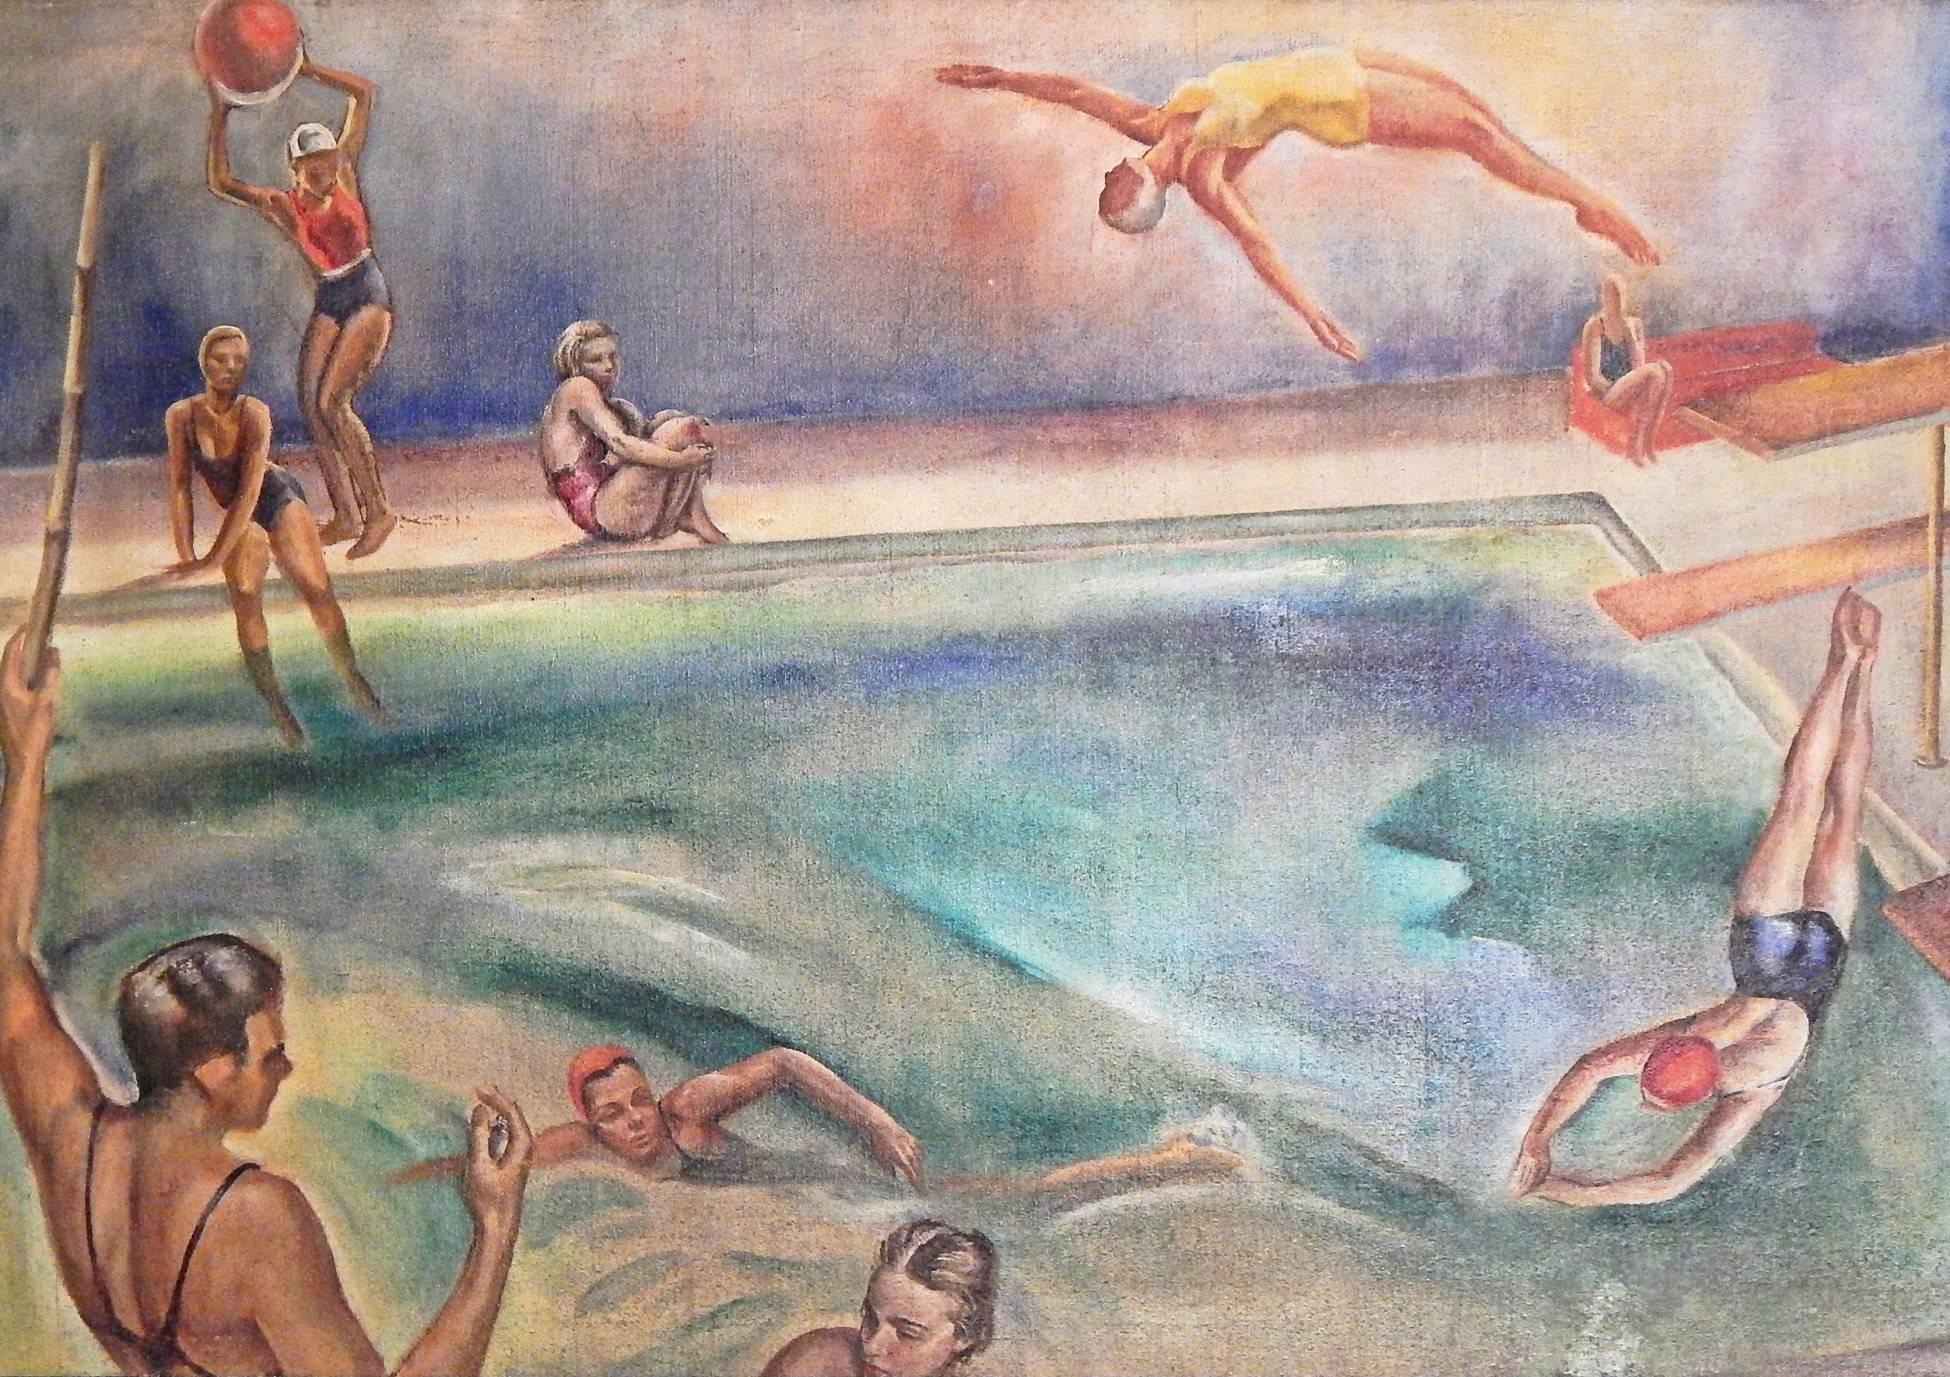 This monumental oil painting is both a study of water, in all its many colors and various depths, and a depiction of female swimmers and divers in various poses. The one exception is a male lifeguard who watches over the scene with his bamboo pole,